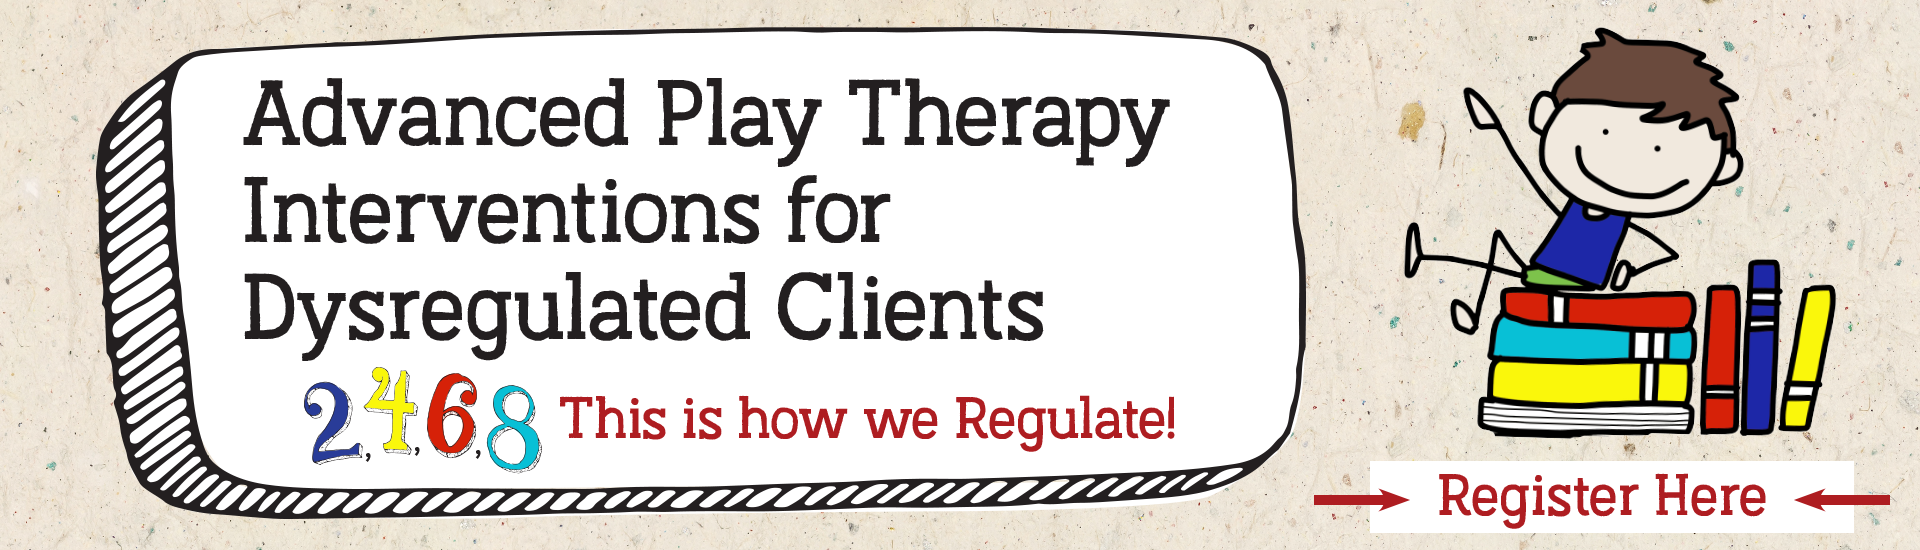 Advanced Play Therapy Interventions for Dysregulated Clients: 2,4,6,8 This is how we Regulate!